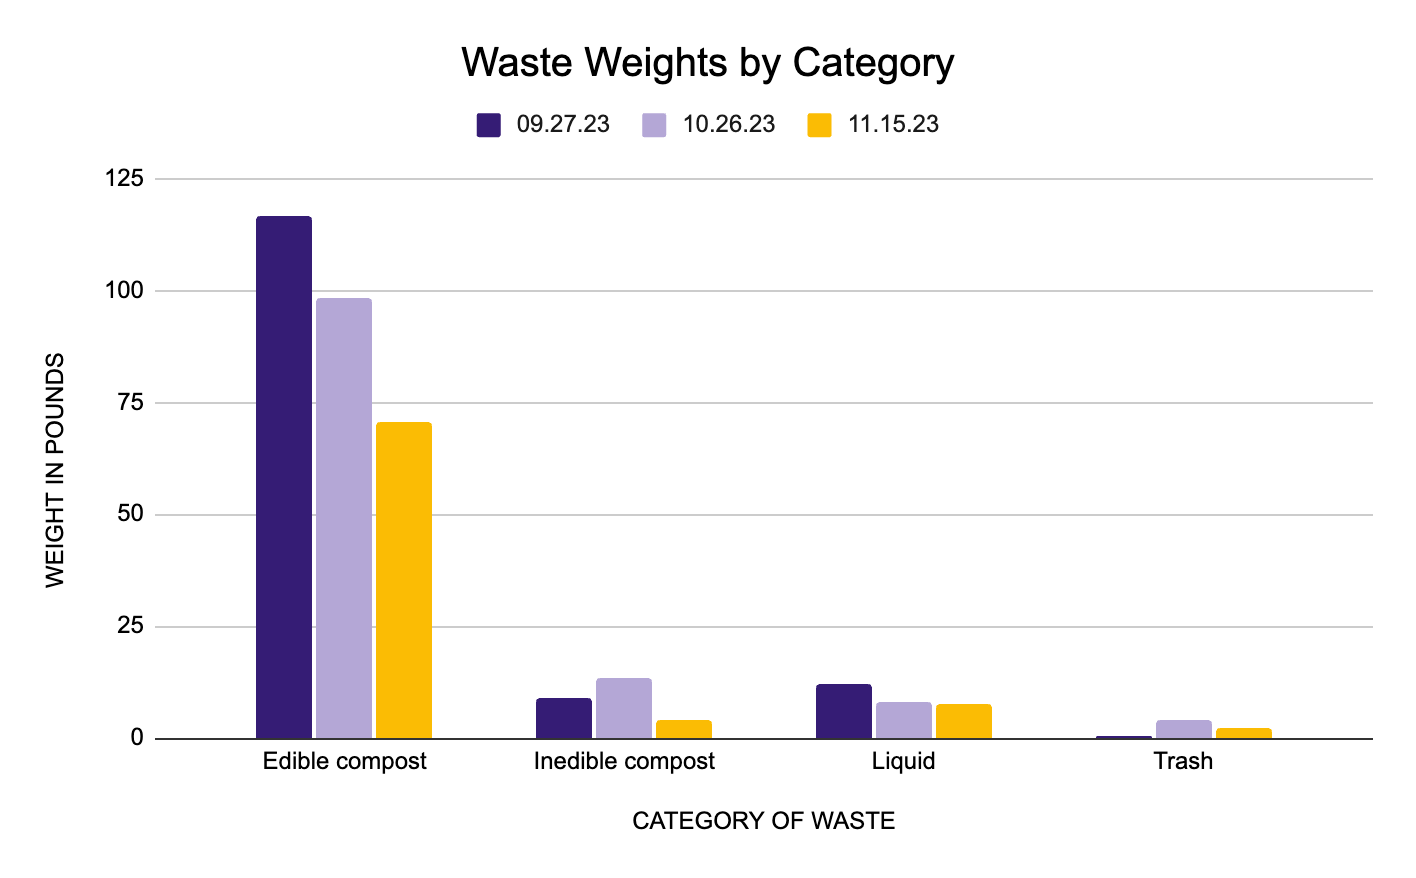 Bar chart of waste weights by category of waste for September, October, and November events. November's weights are the lowest in each category except for trash.
